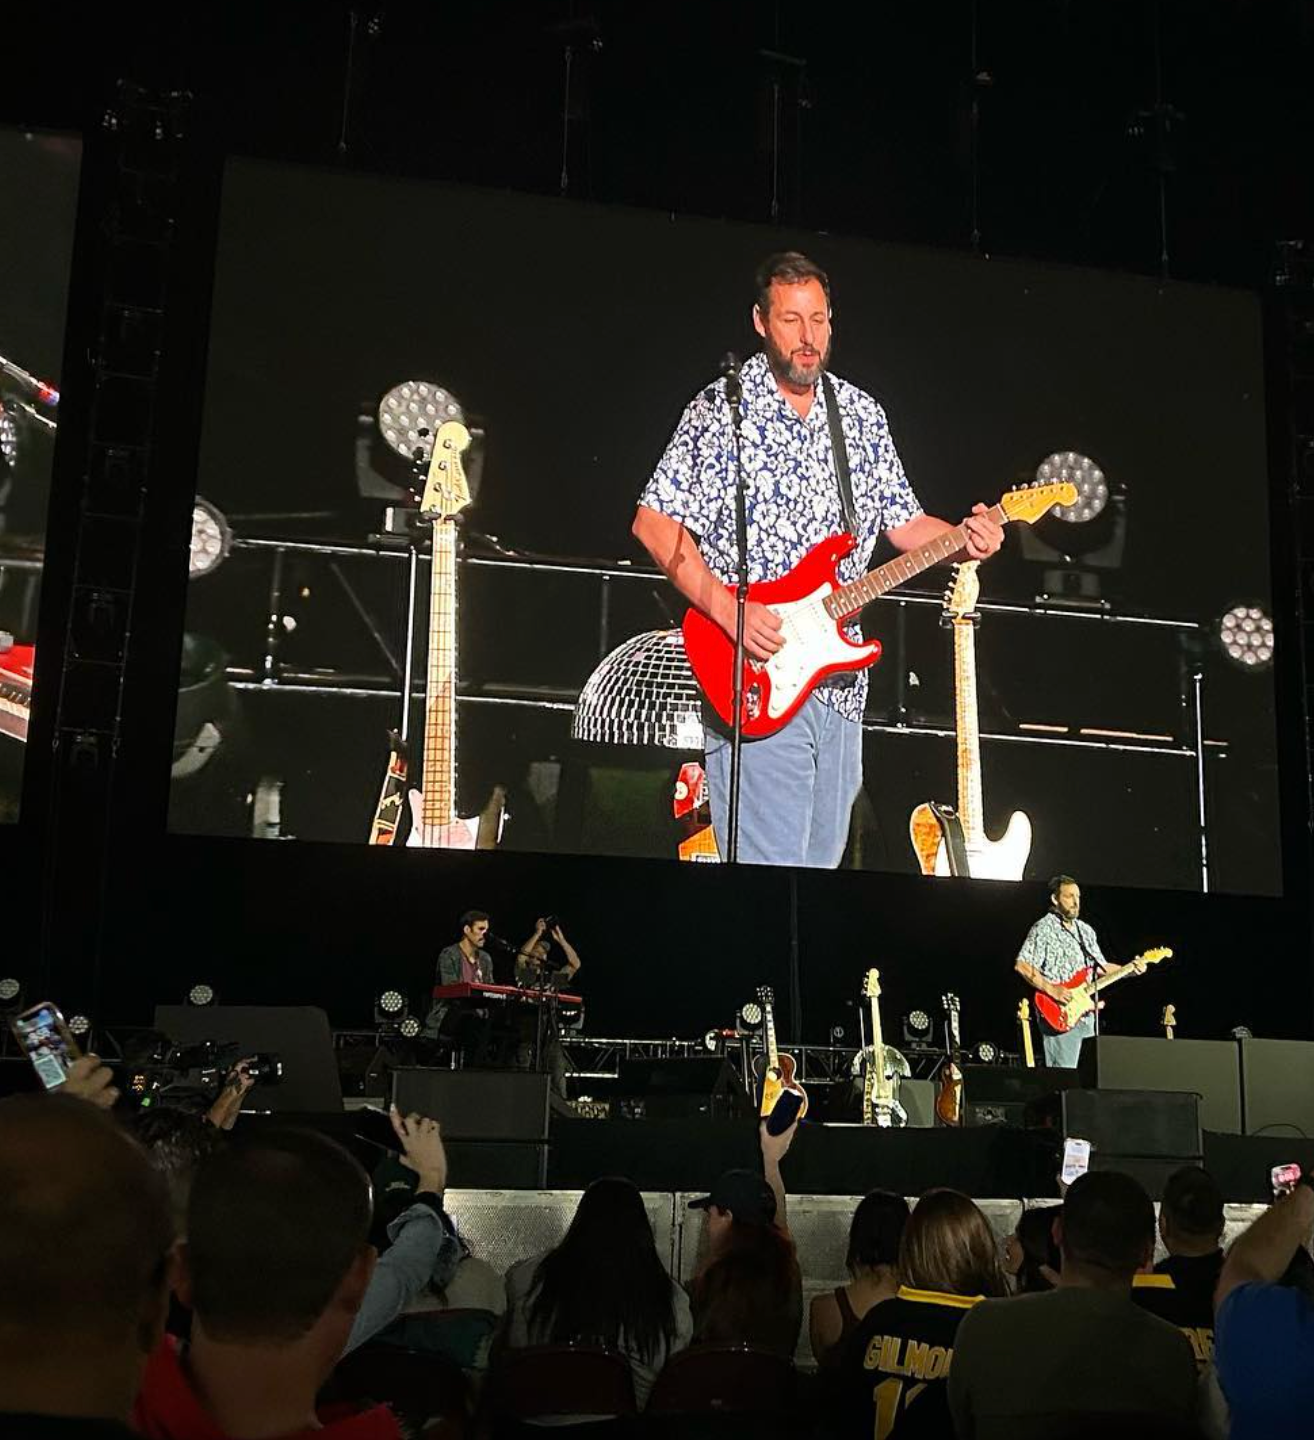 Mom's Night Out - "Adam Sandler's 'I Missed You Tour' in Vancouver: A Night of Laughter, Music, and Pure Nostalgia"